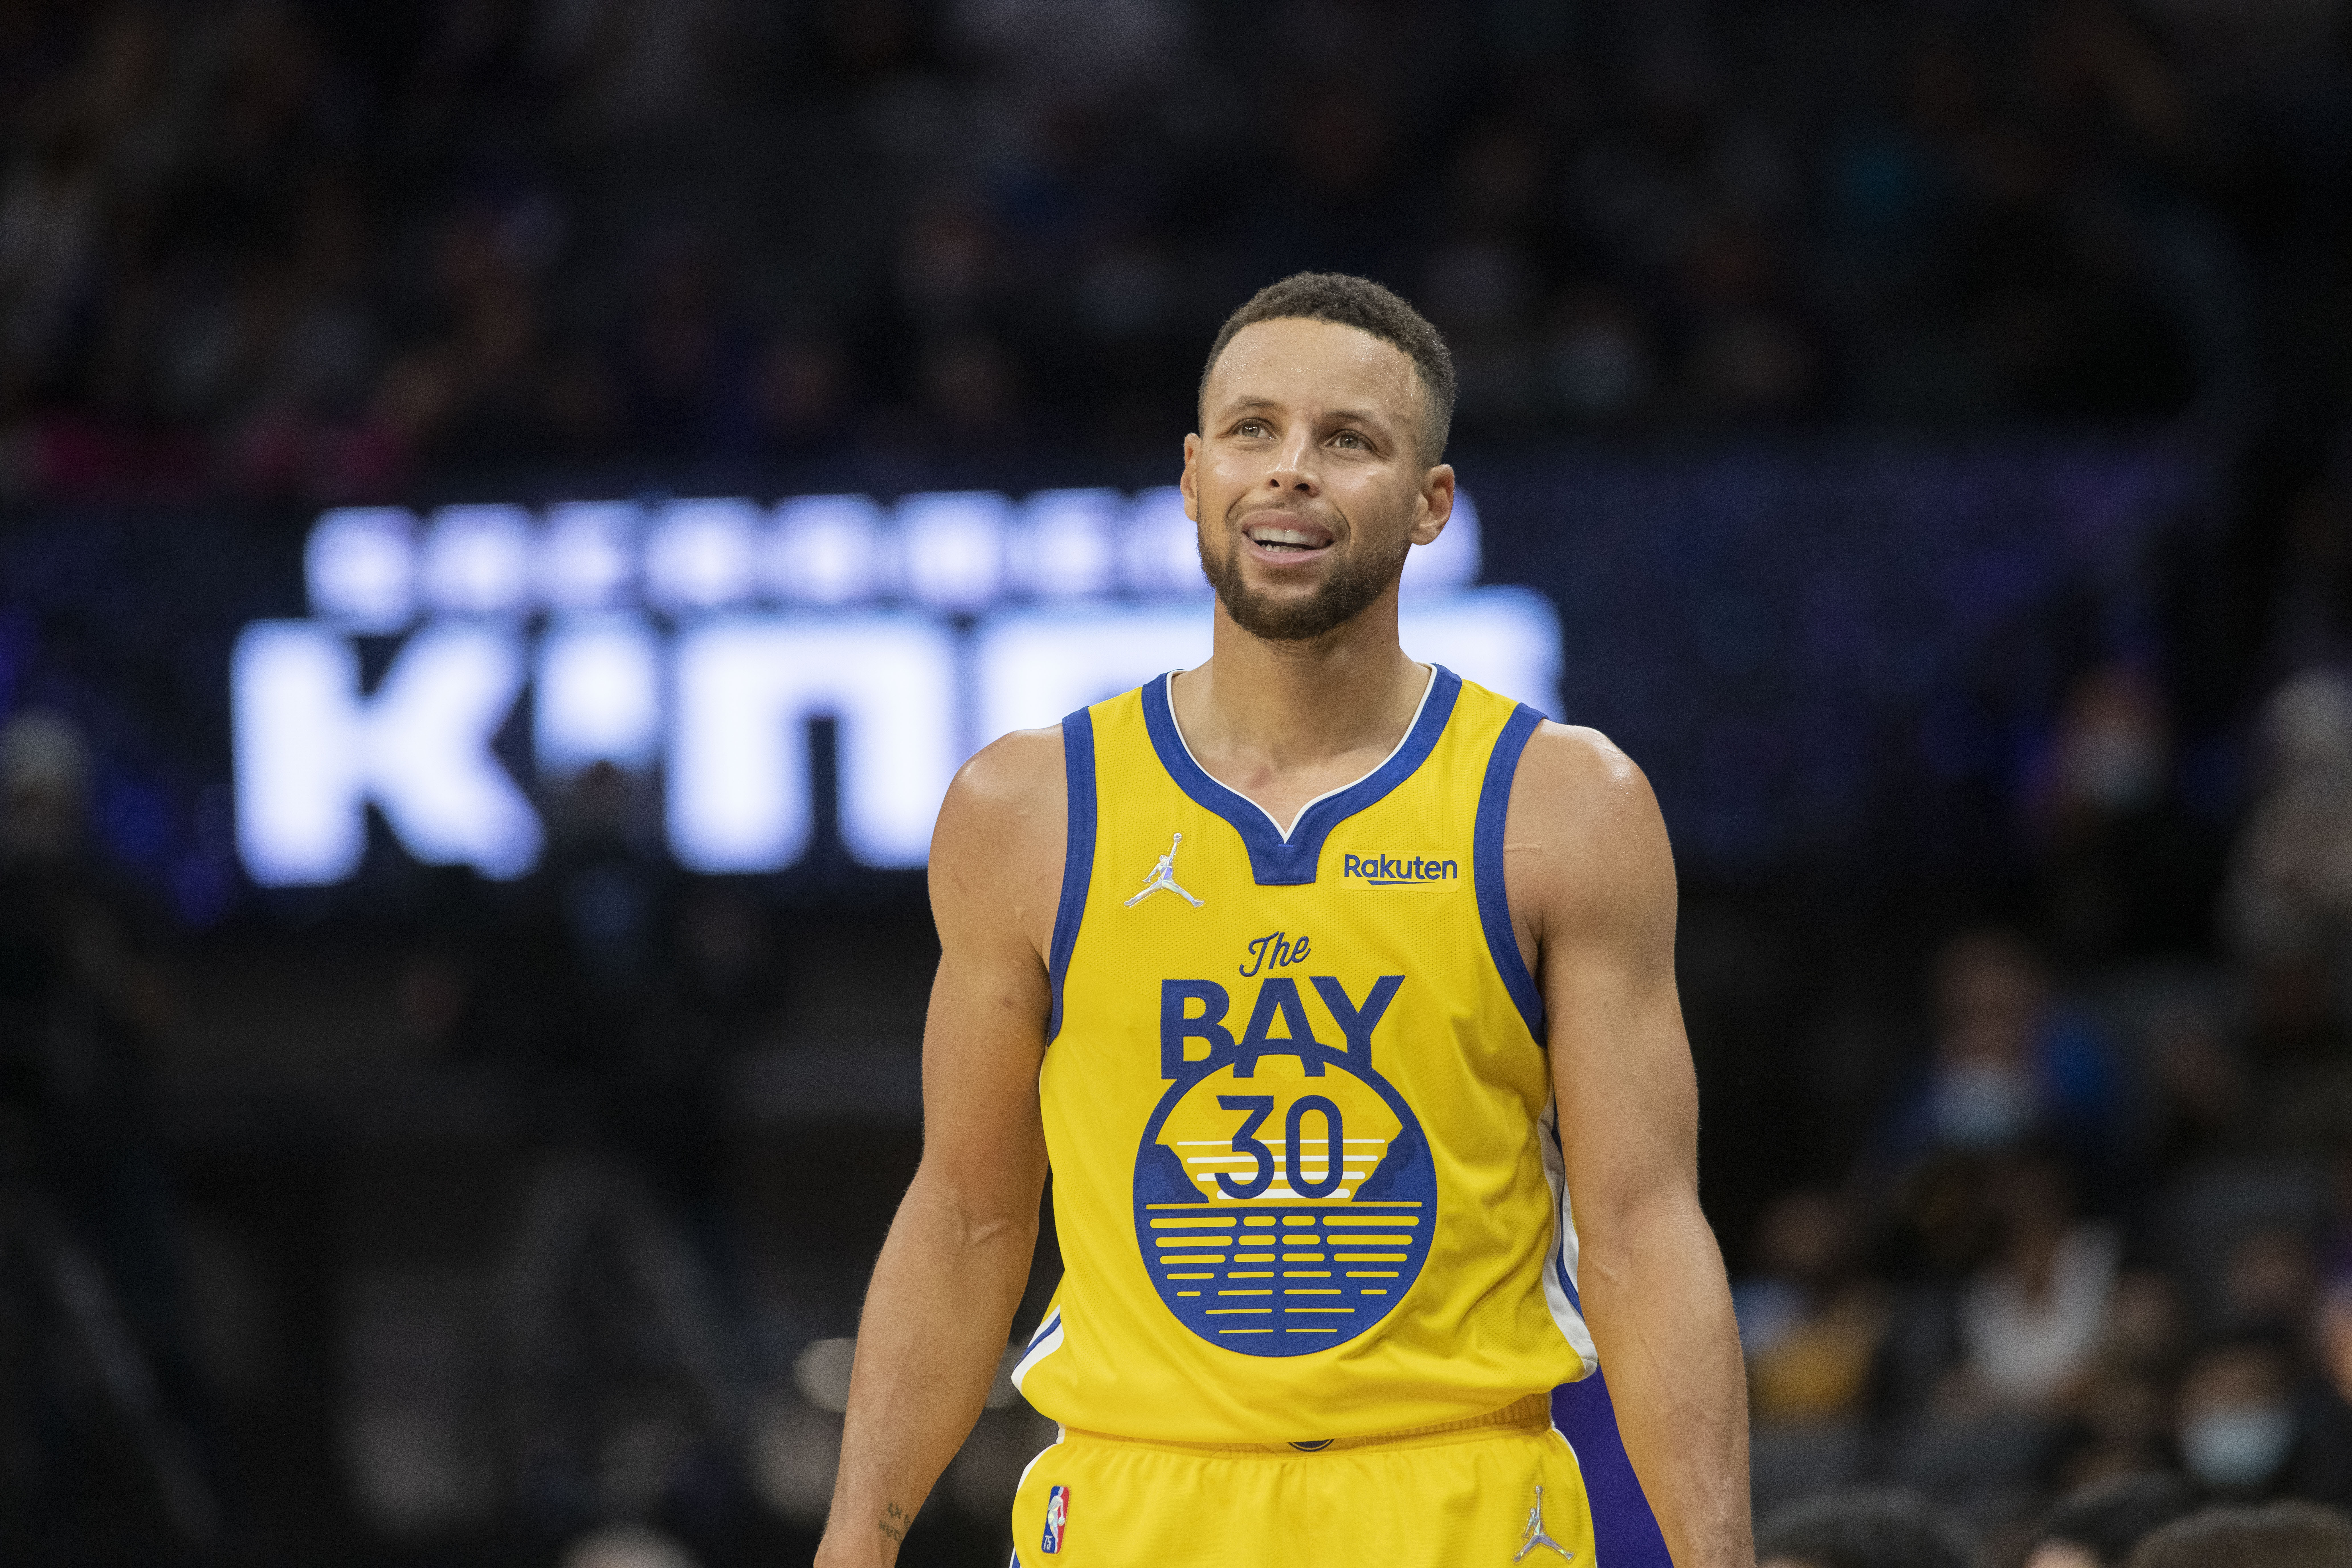 Warriors' Stephen Curry breaks Ray Allen's NBA career 3-point record